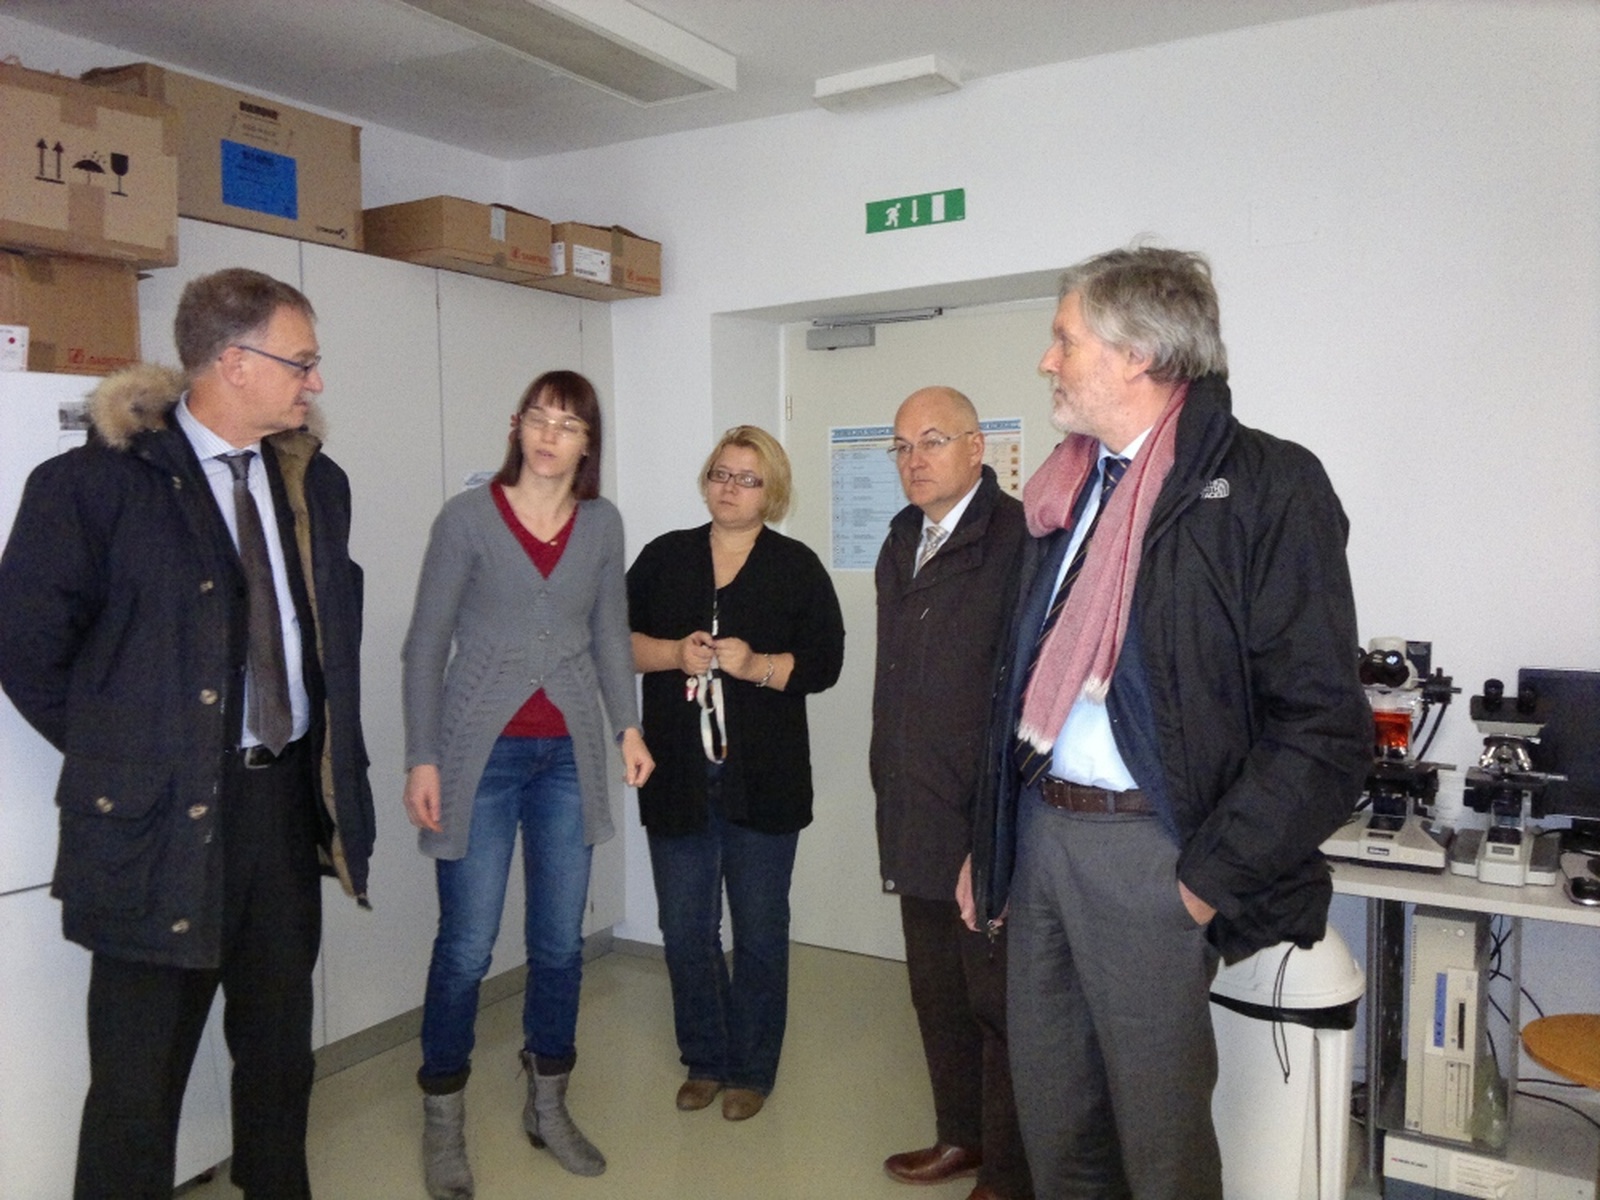 The Visit of the Rector of the University of Trieste